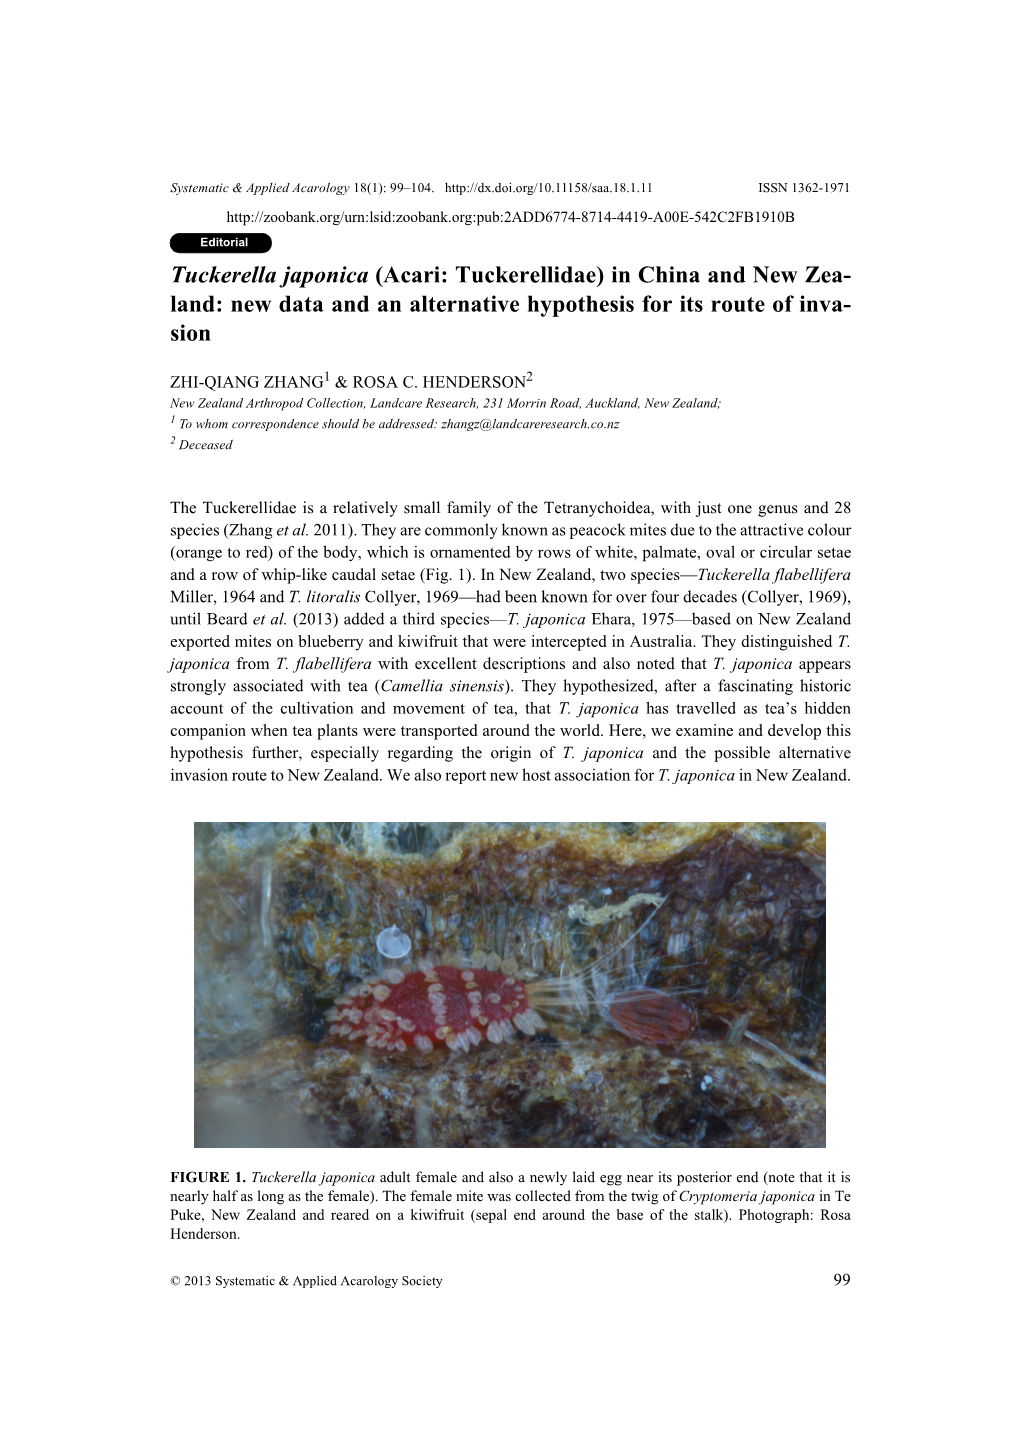 Tuckerella Japonica (Acari: Tuckerellidae) in China and New Zea- Land: New Data and an Alternative Hypothesis for Its Route of Inva- Sion